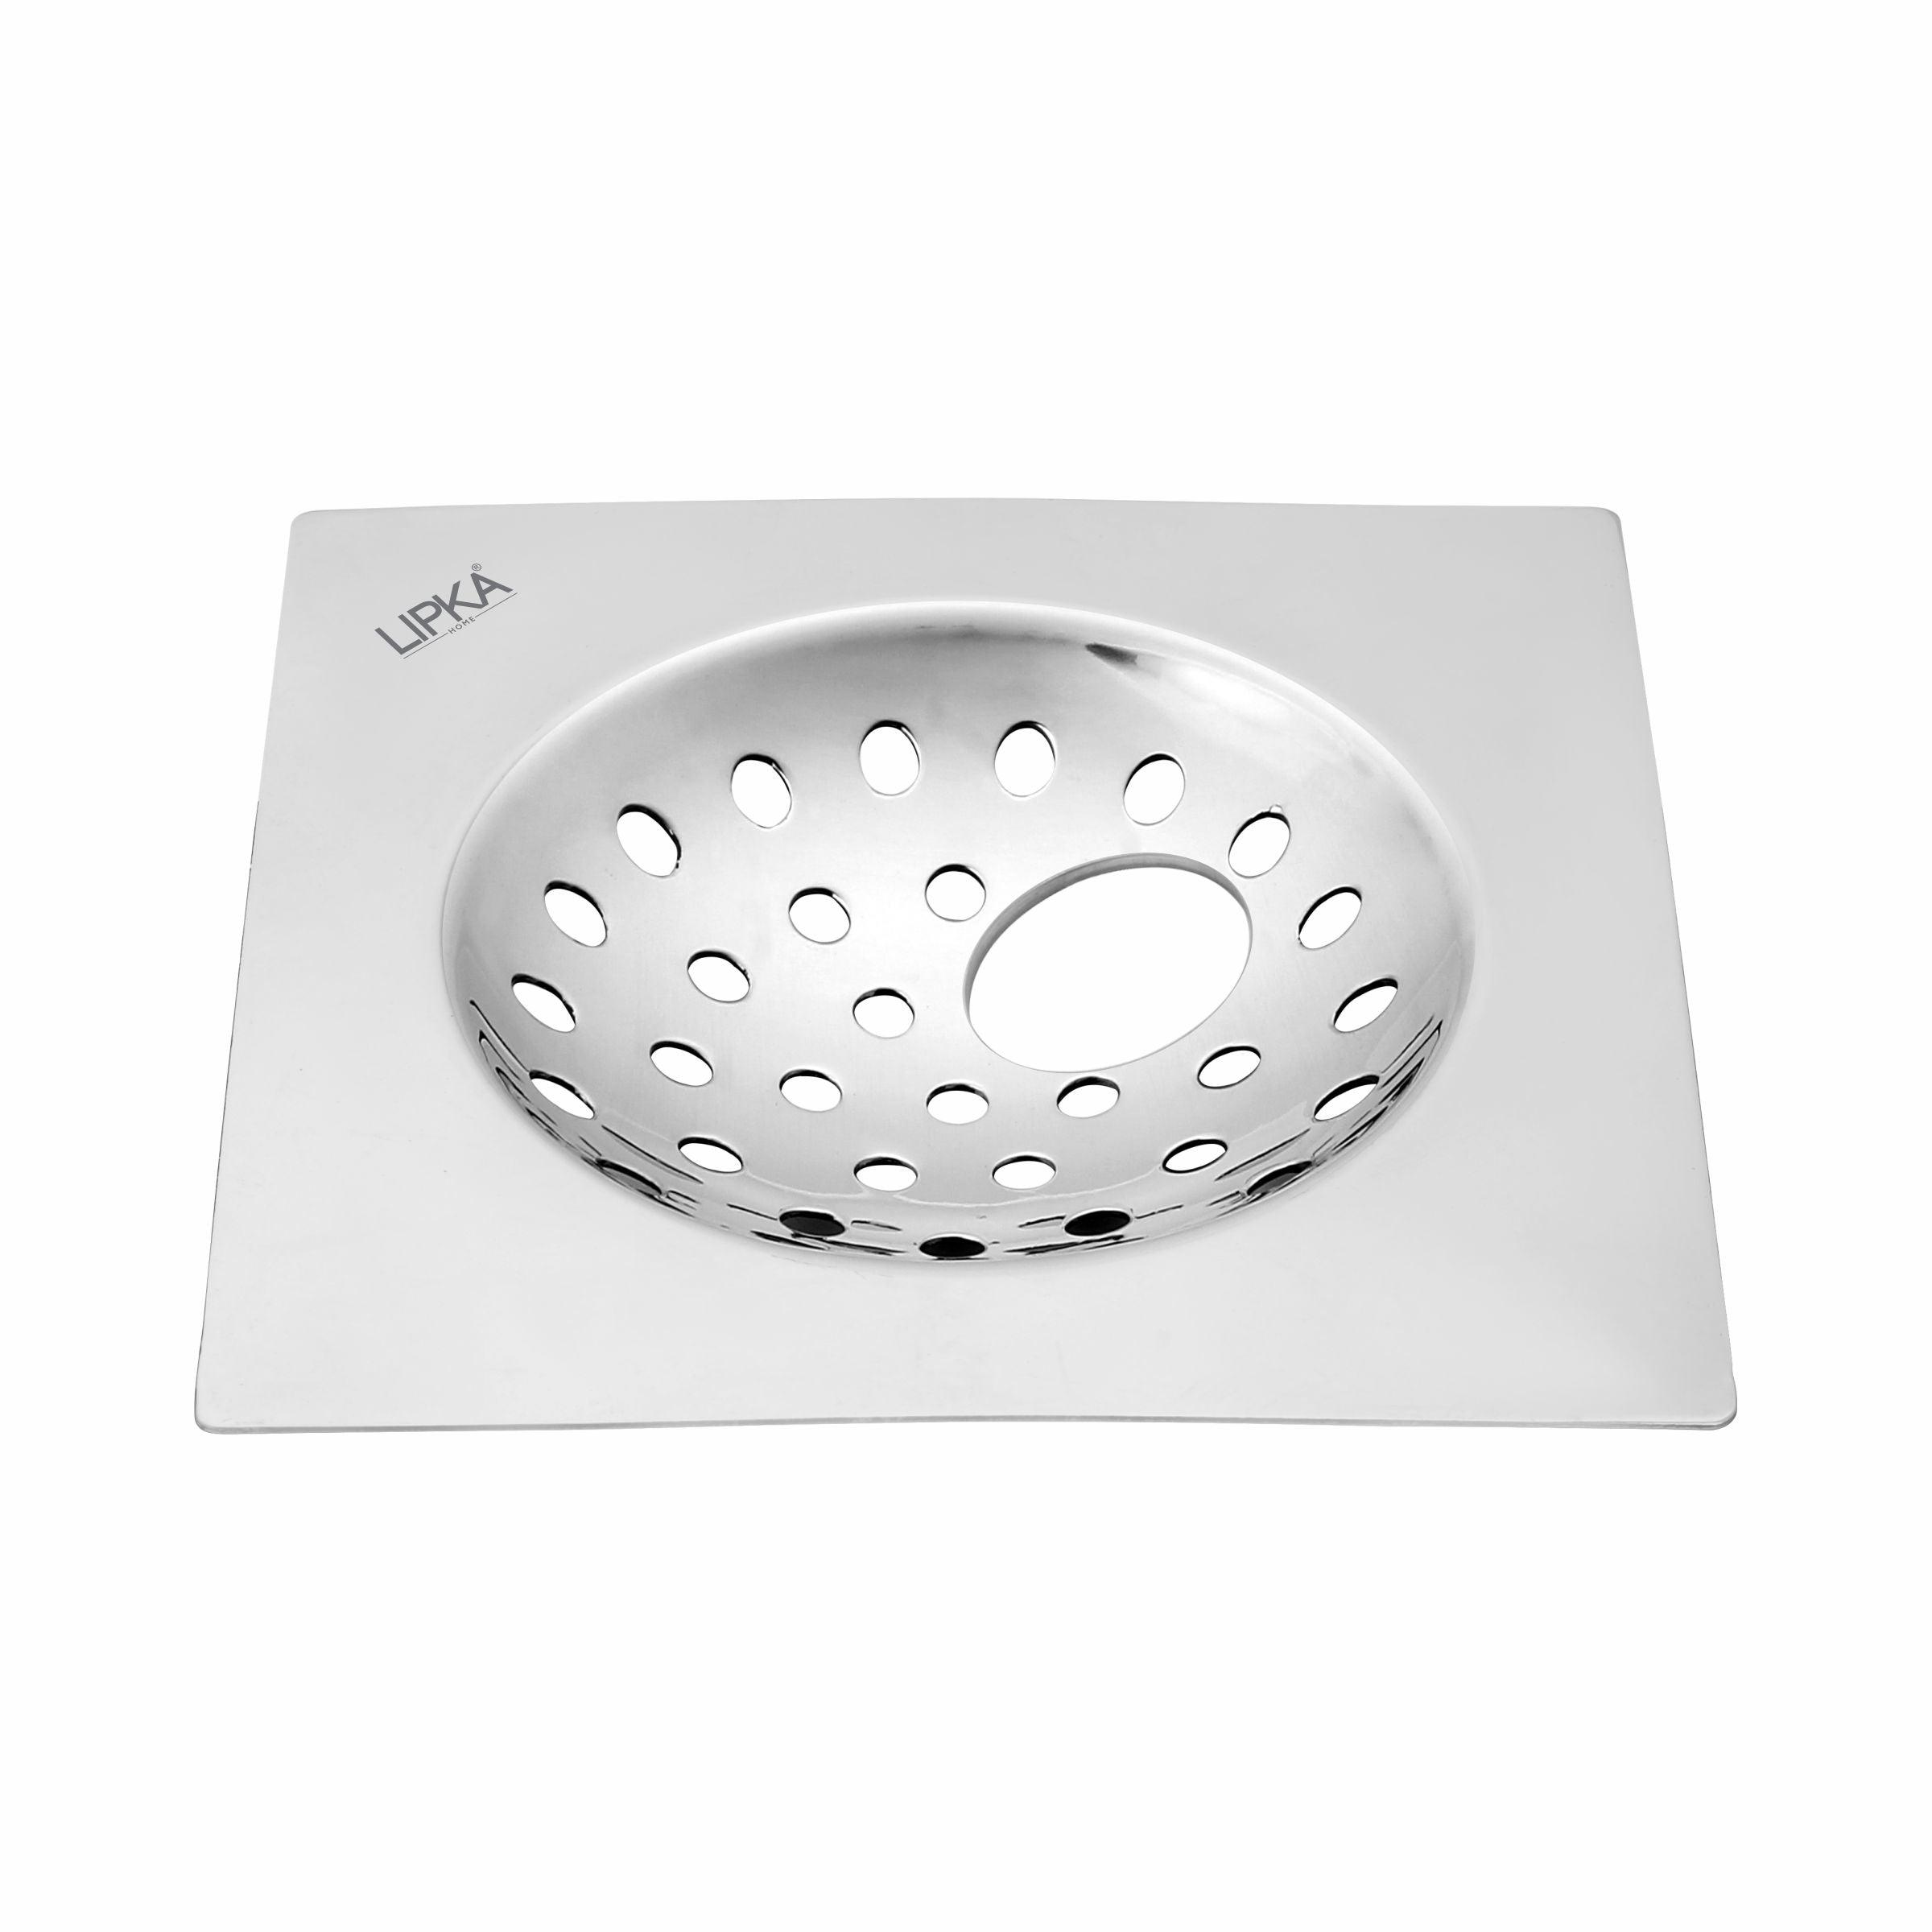 UNO Square Flat Cut Floor Drain (6 x 6 Inches) with Hole - LIPKA